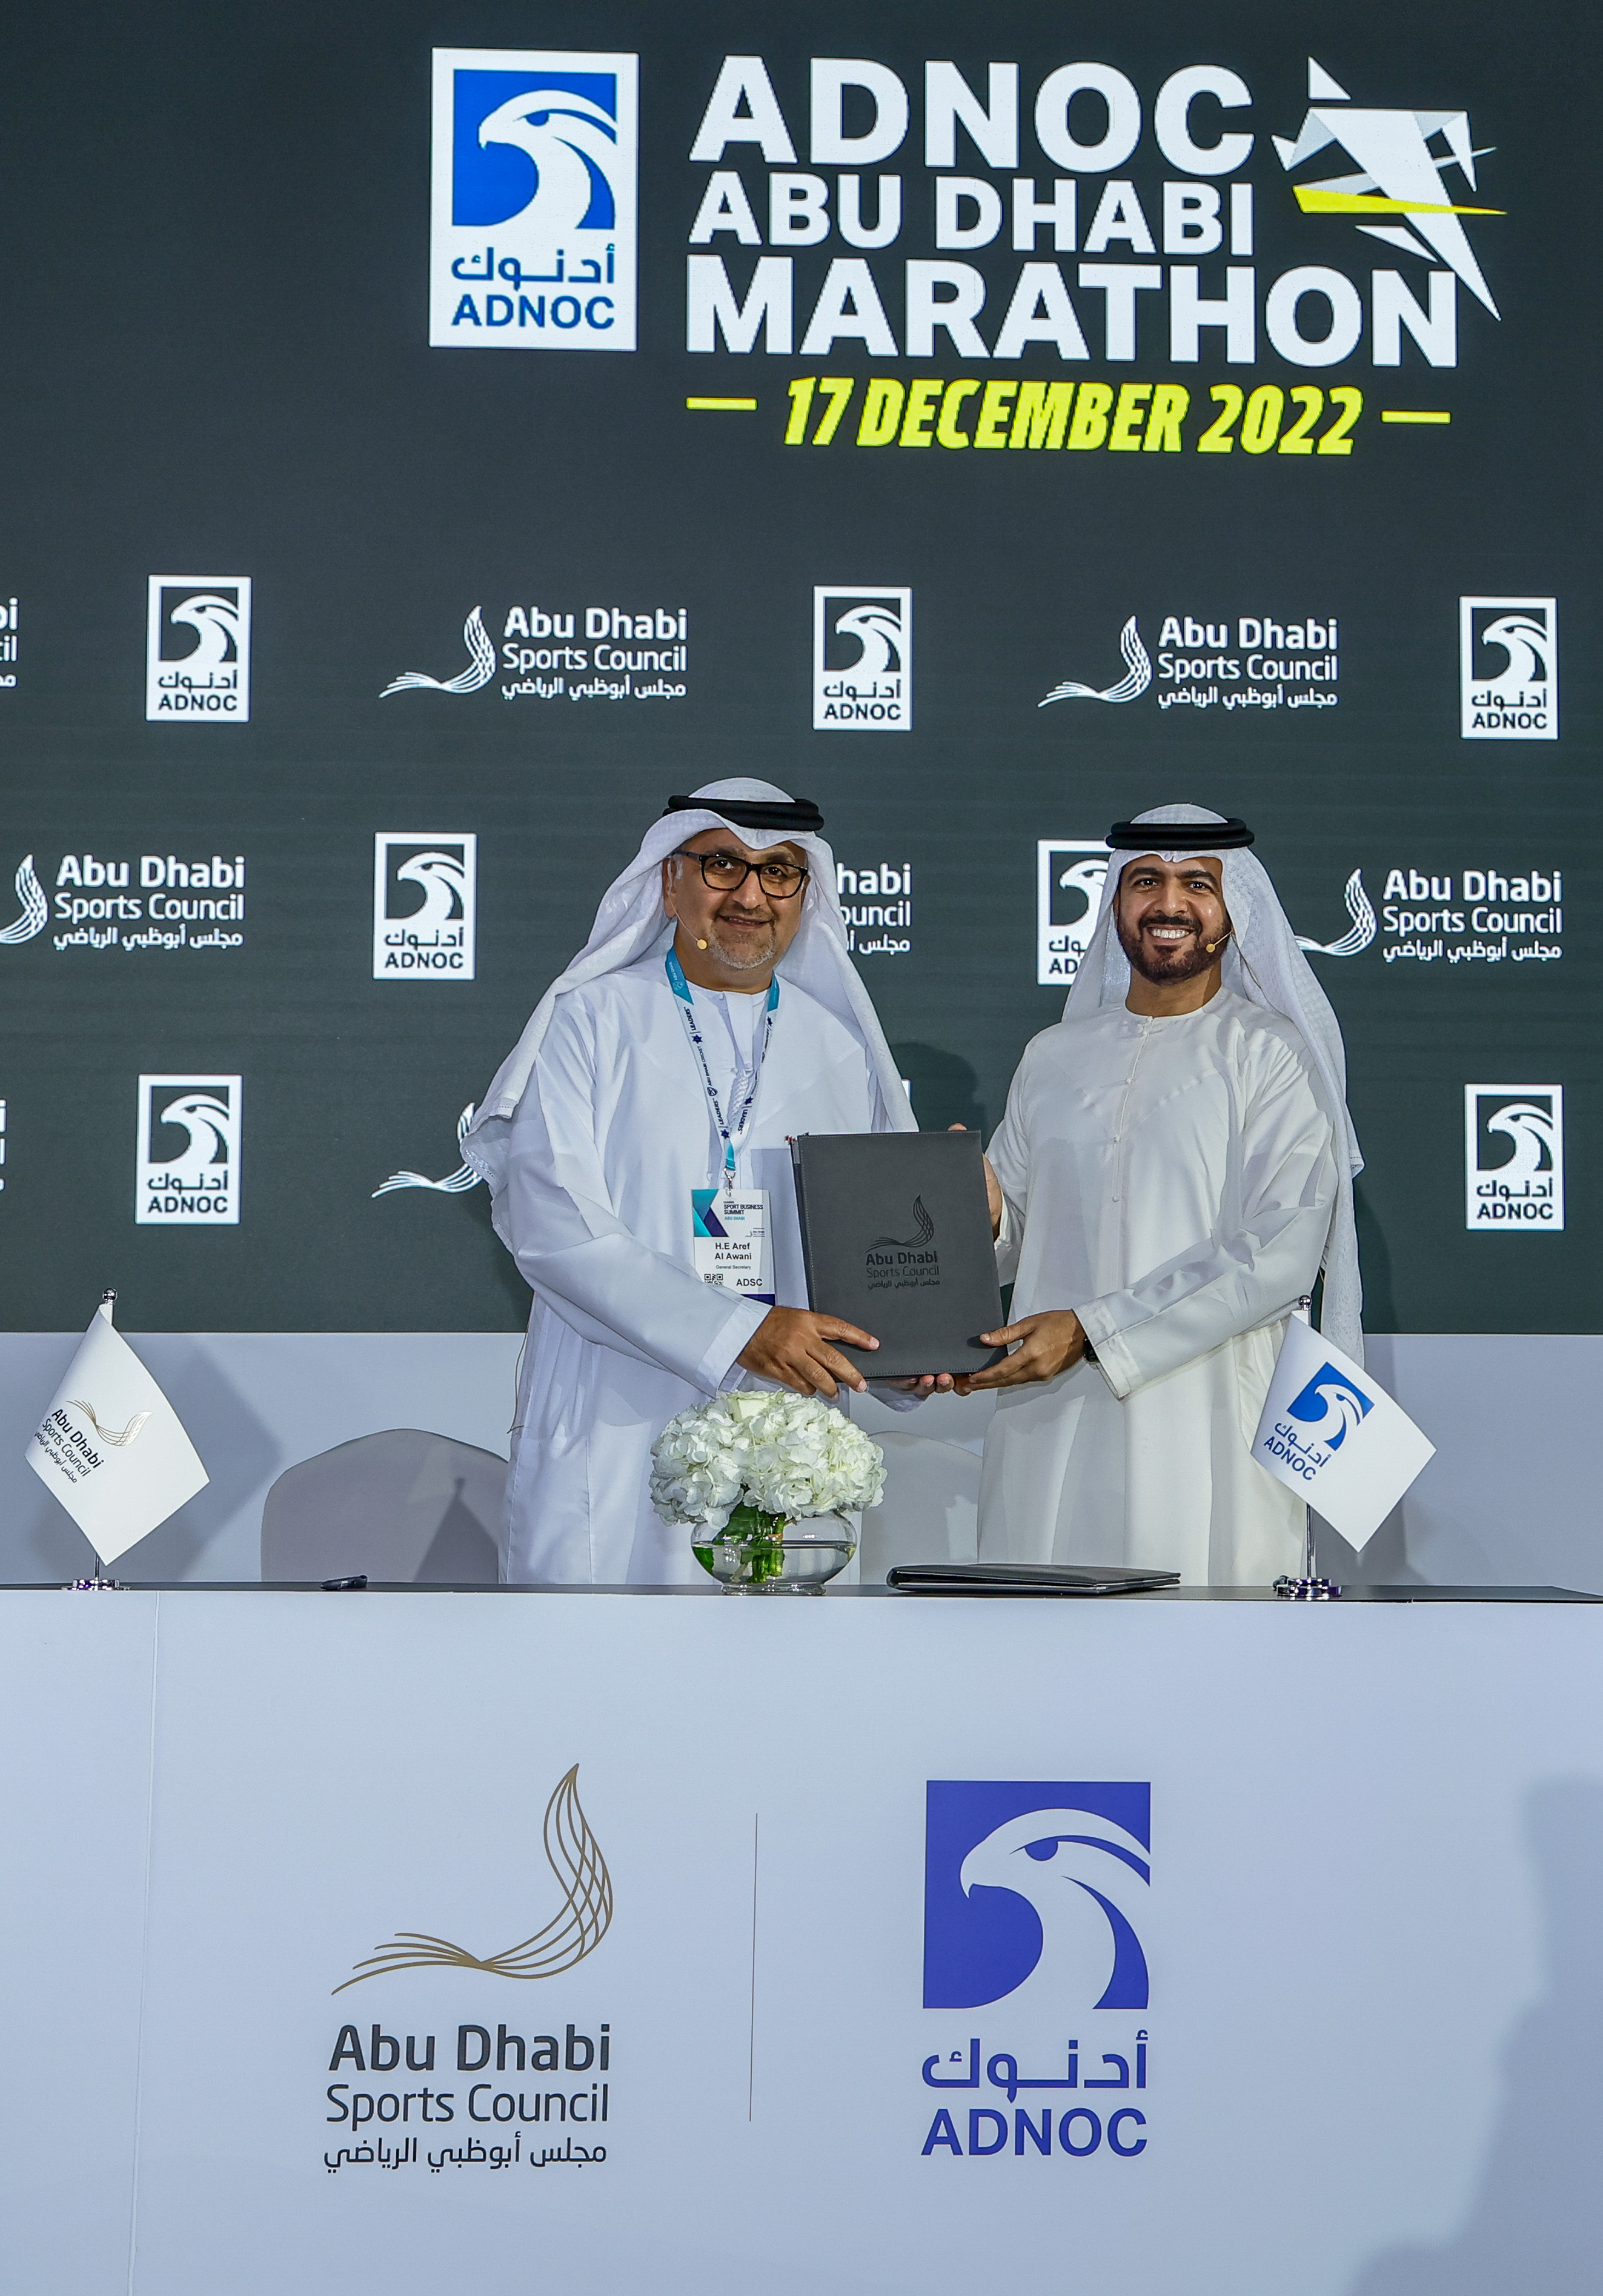 ADNOC Abu Dhabi Marathon Returns In December With A Commitment To Grow The UAE’s Running Community